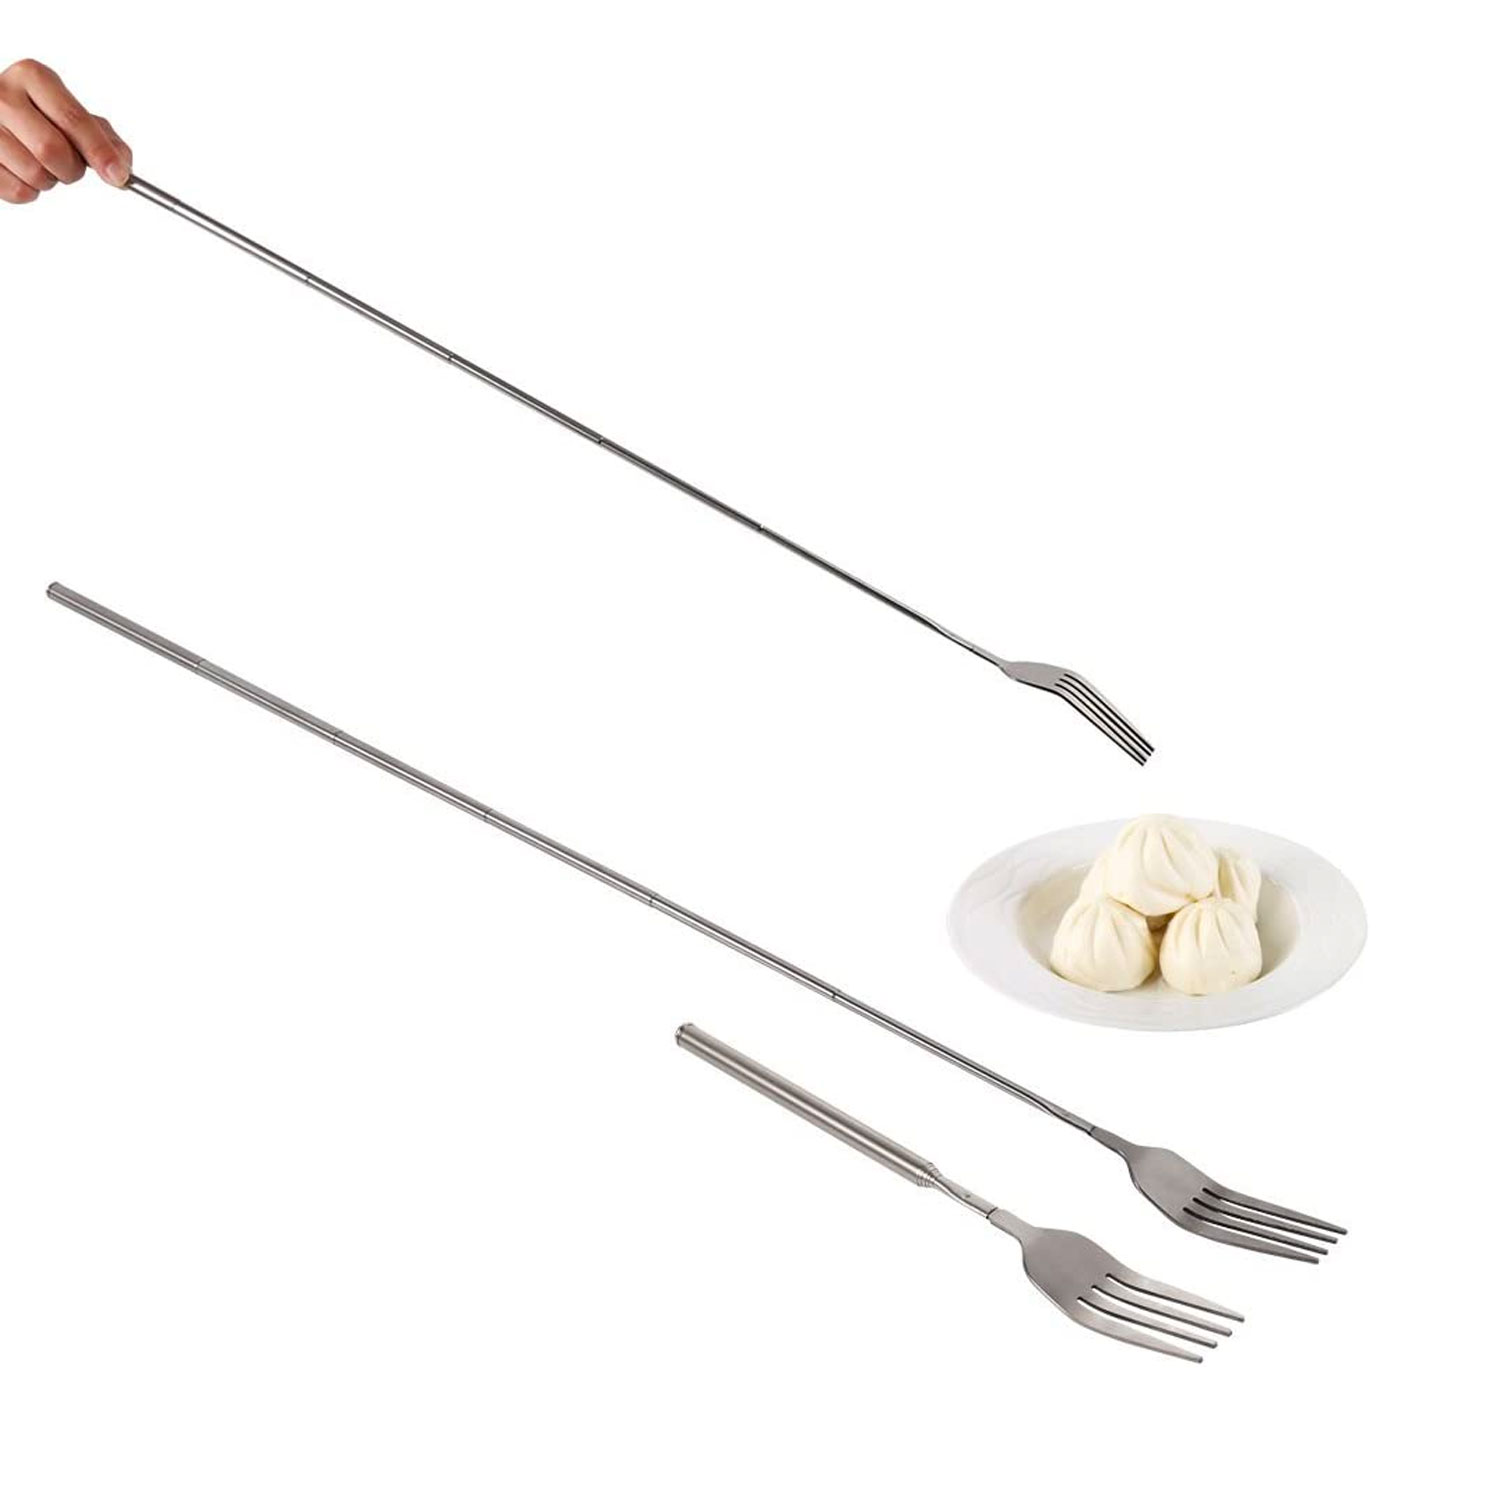 Giant Extendable Dinner Fork - Weird gifts for dad